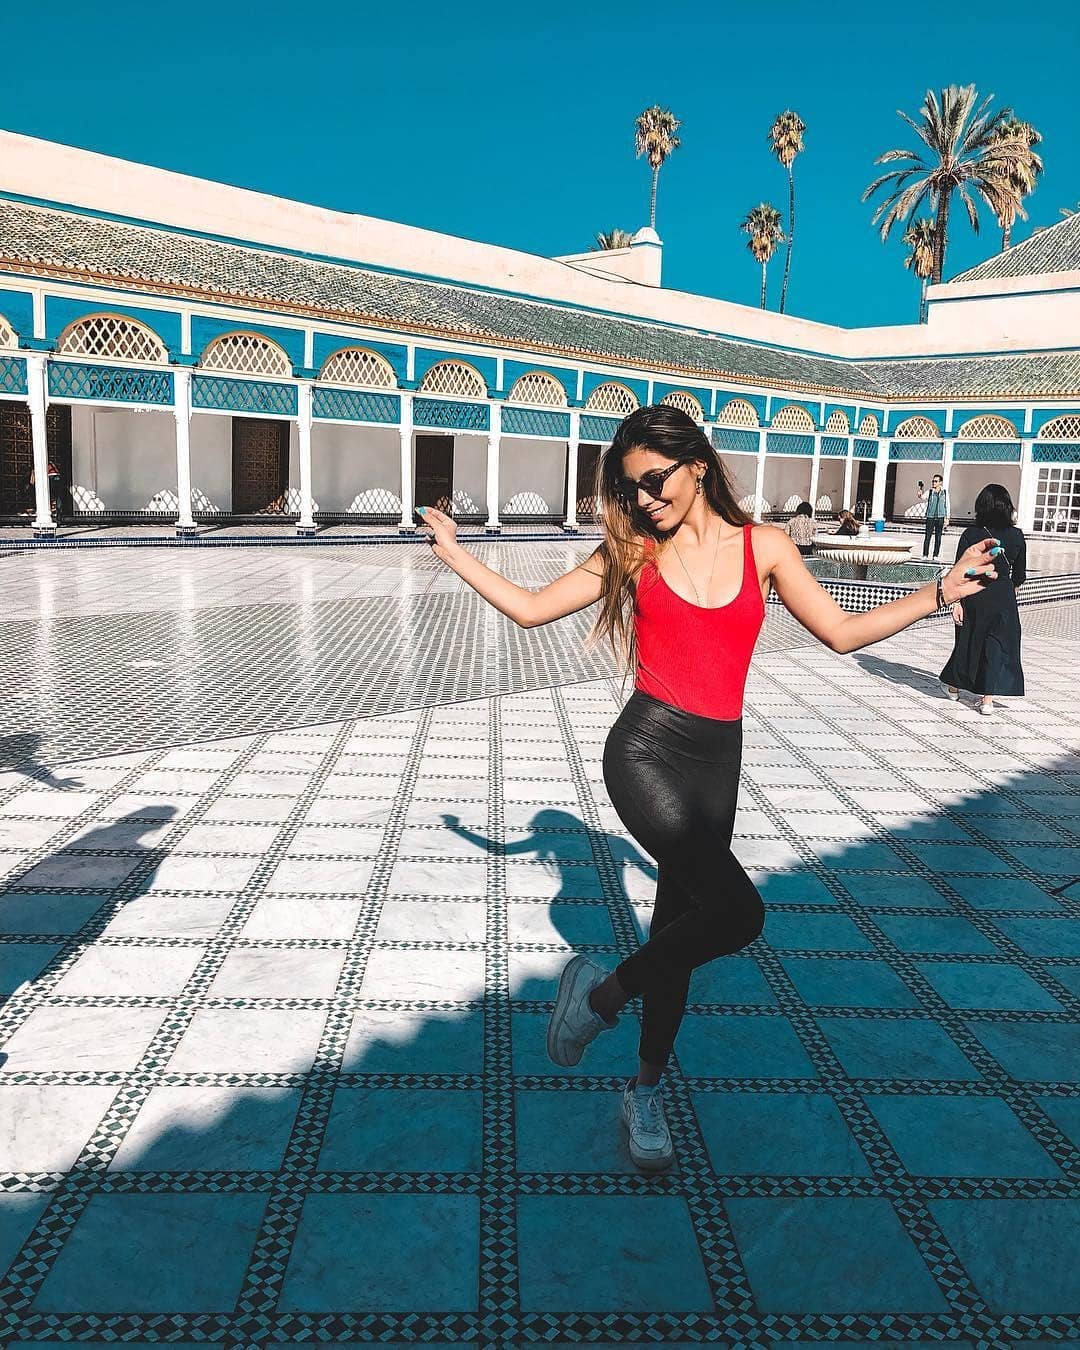 A girl dance in The Bahia Palace In Marrakech